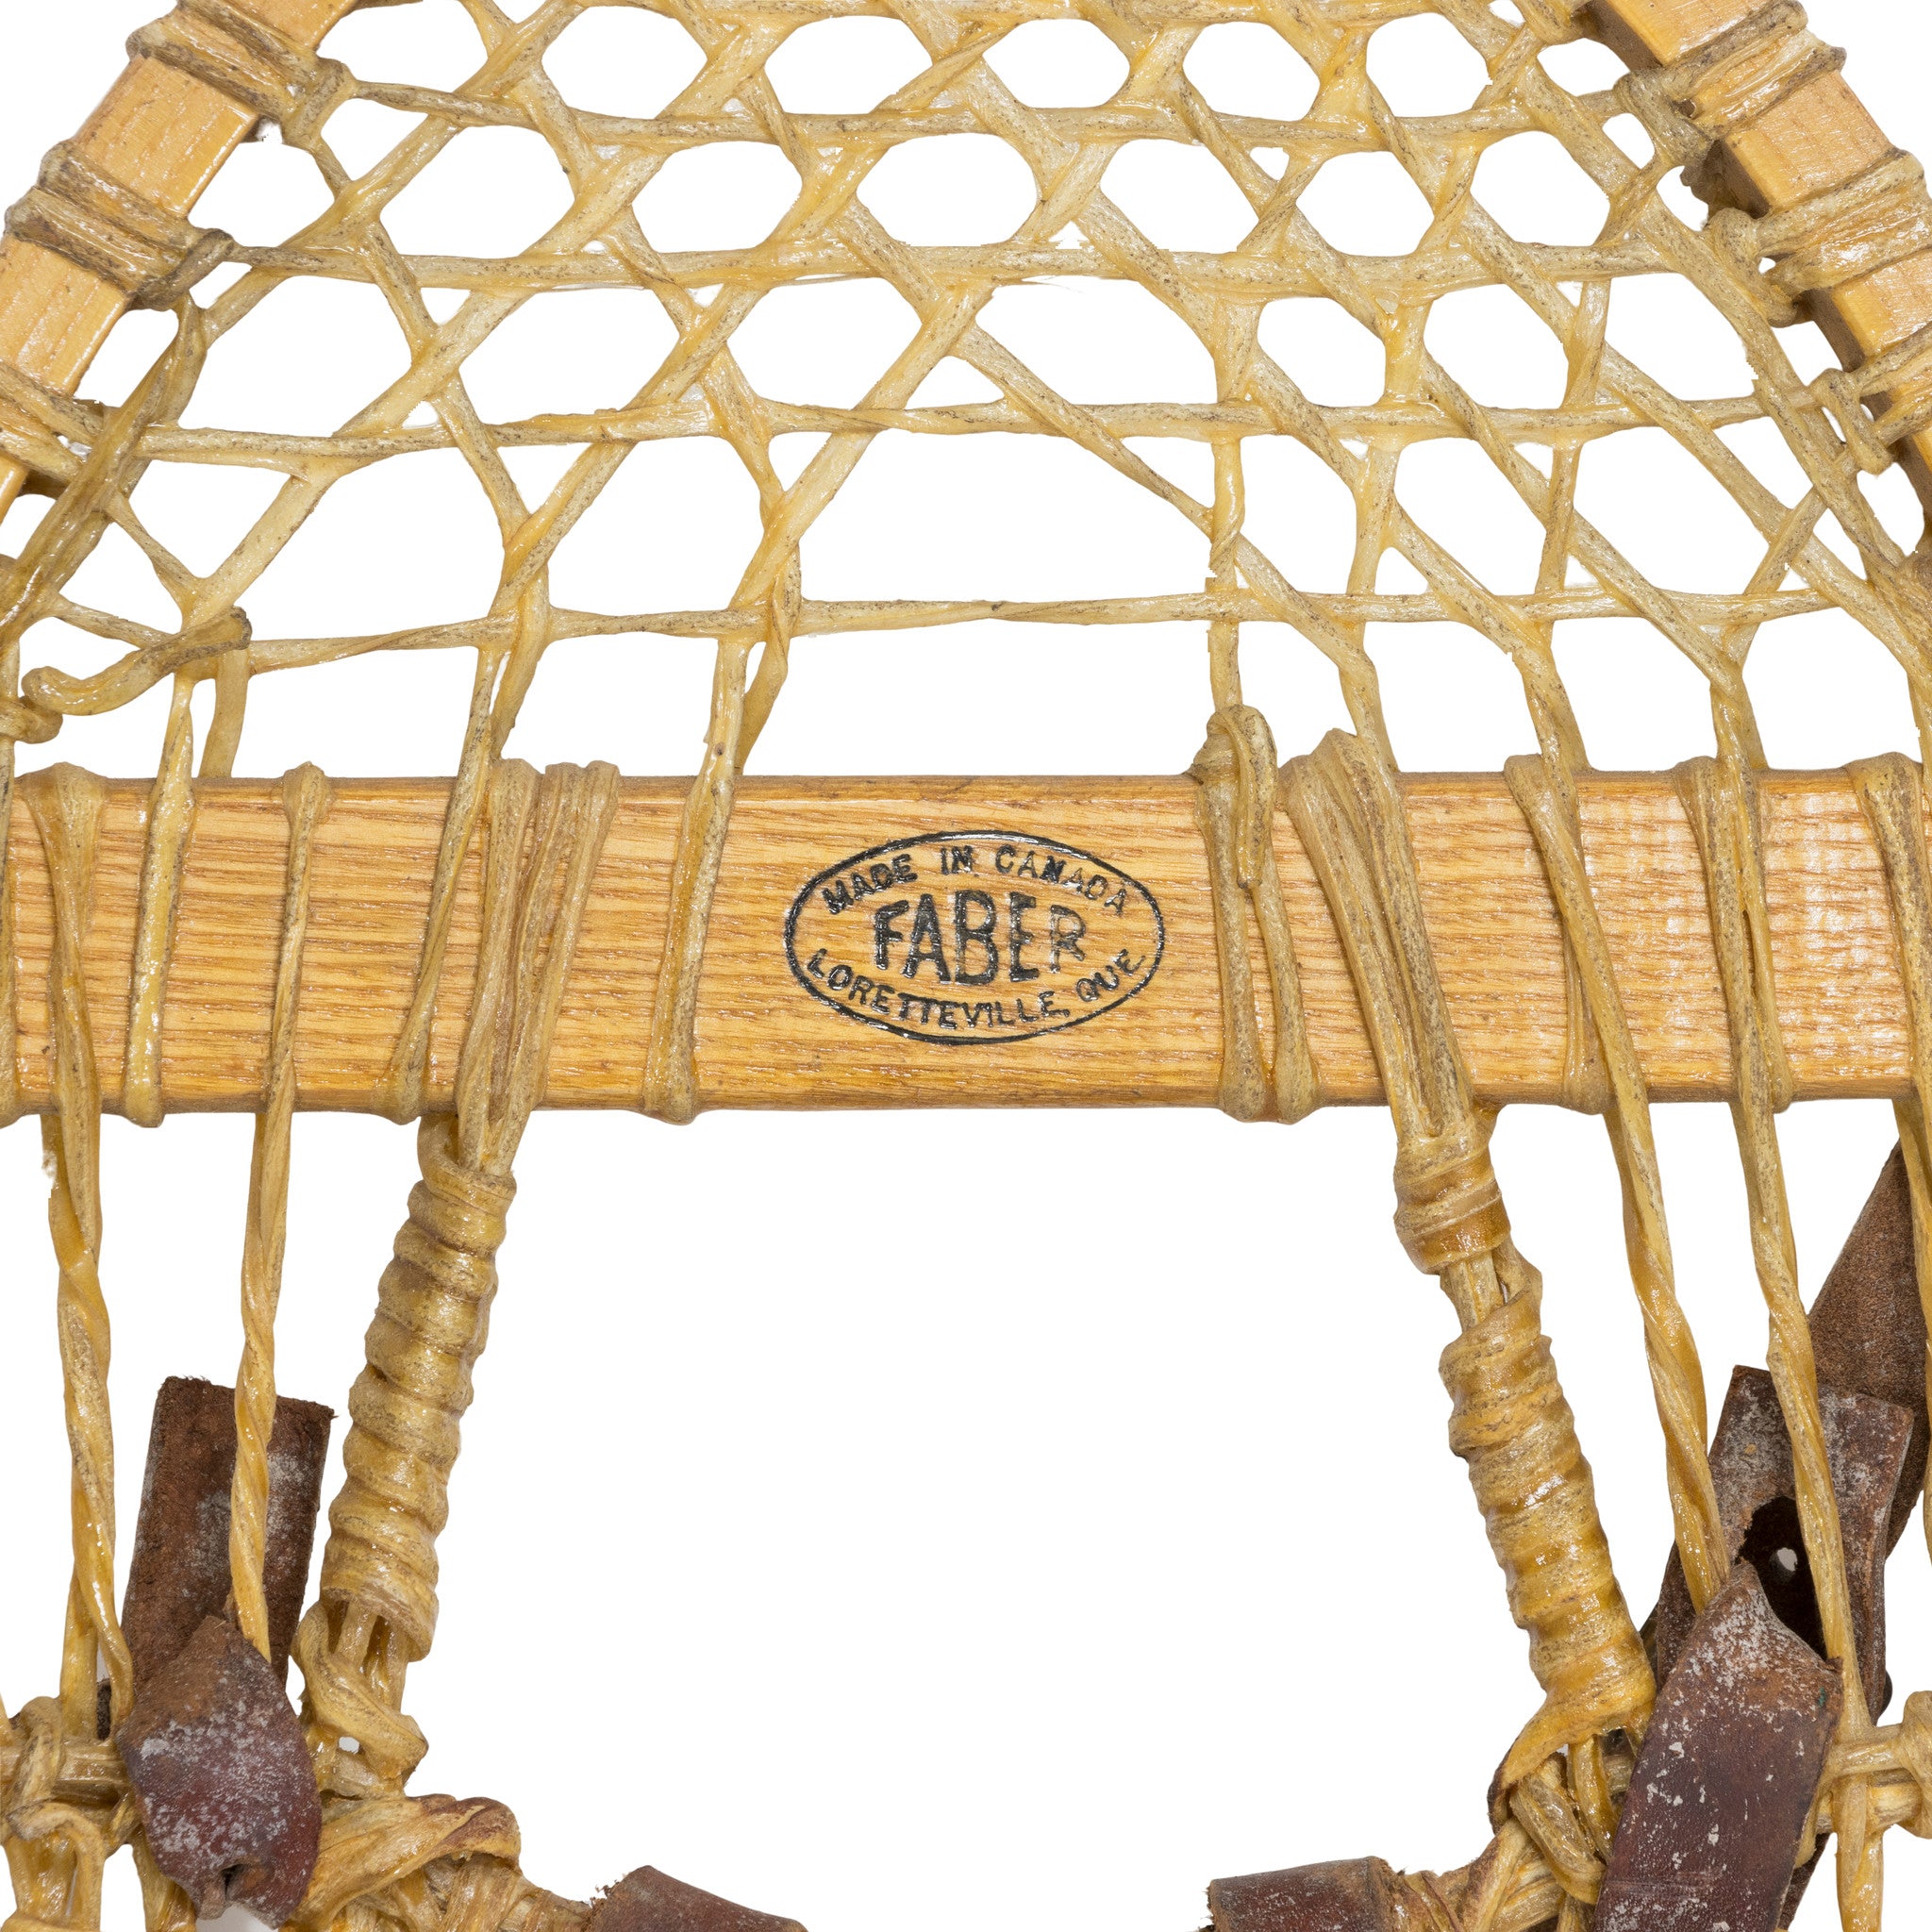 Faber Teardrop Shaped Snowshoes